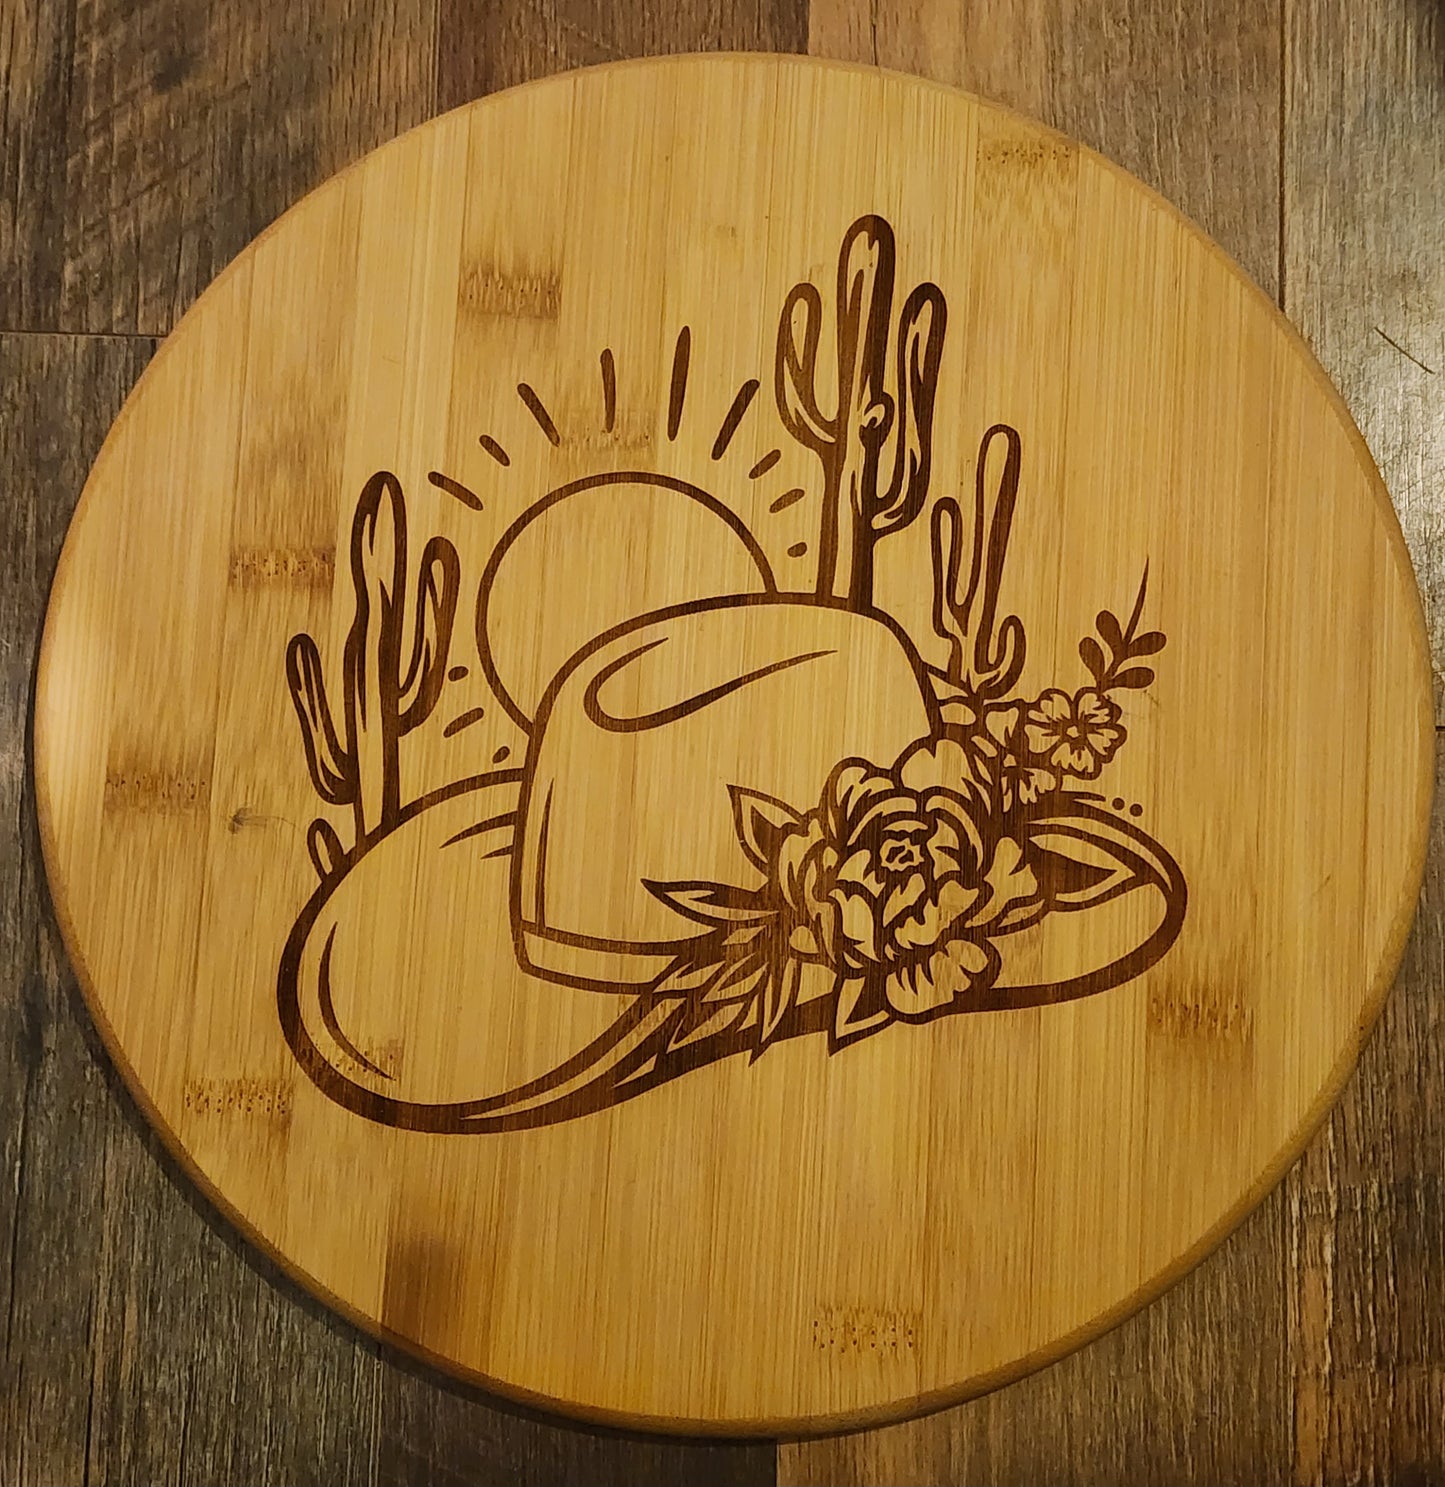 Western Cowboy, Cowgirl hat with roses and cactus, round circle cutting , serving board,